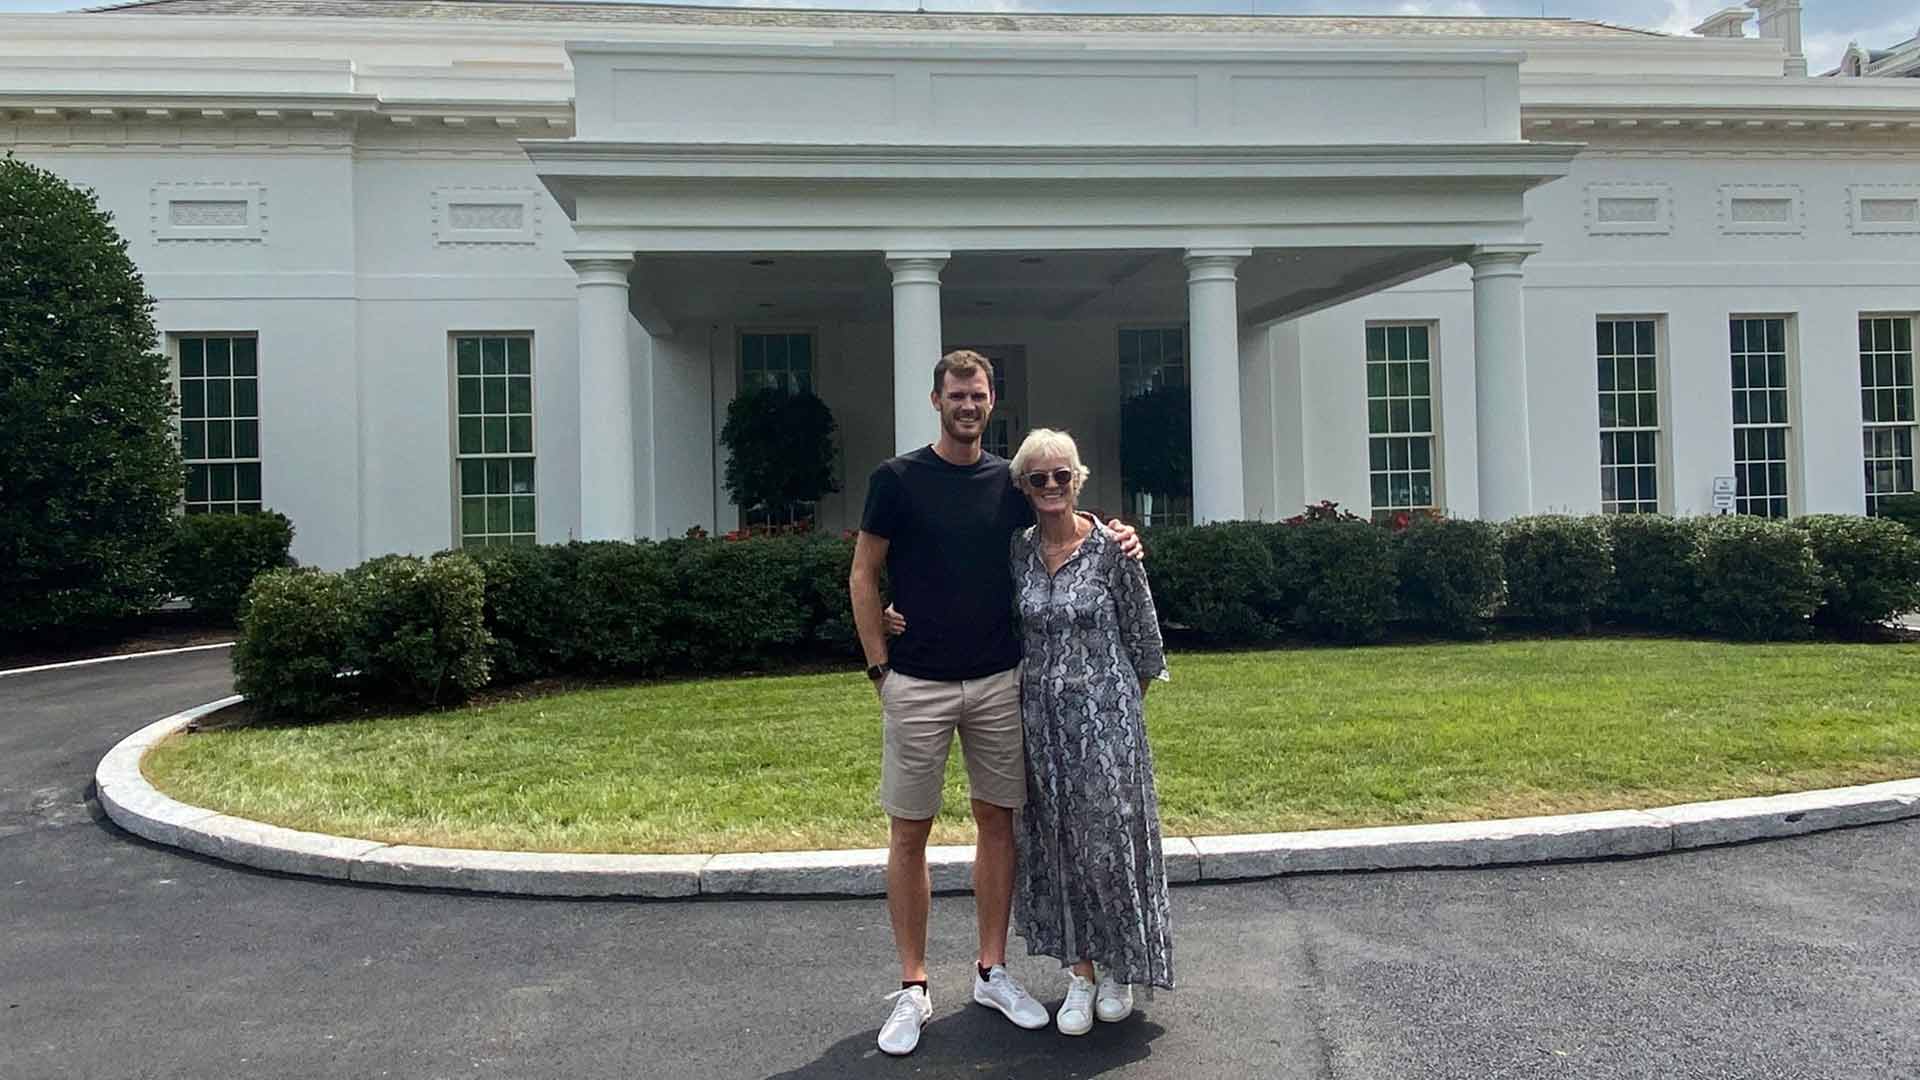 Jamie Murray and Judy Murray visit during a visit to The White House.